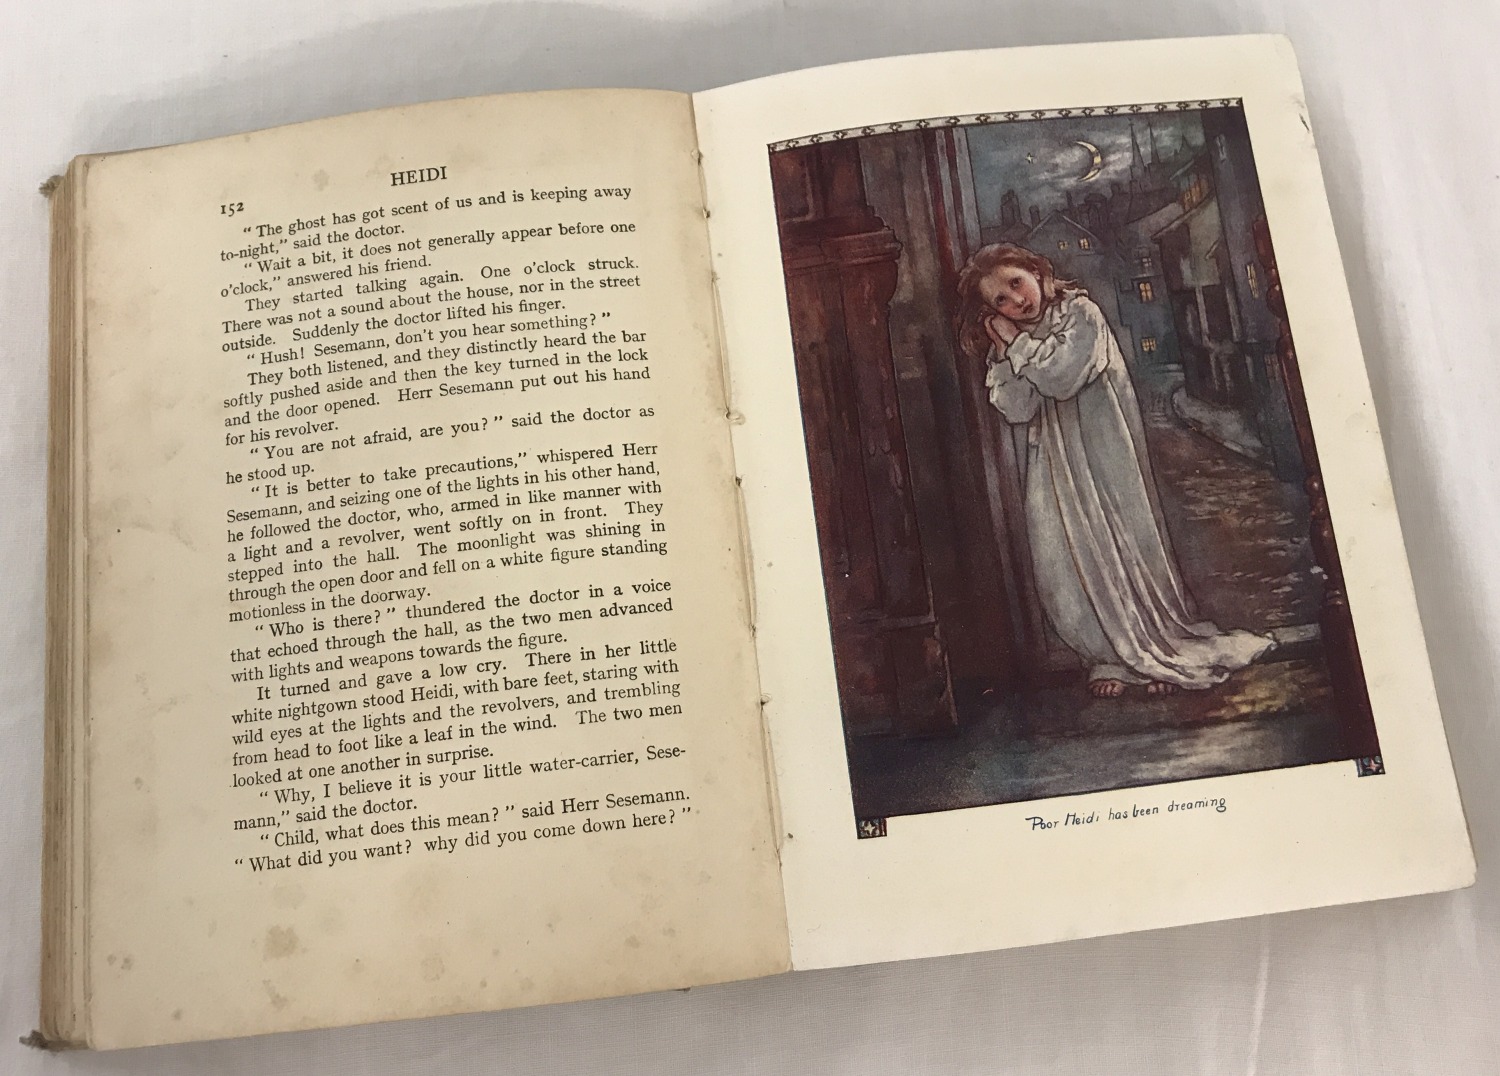 Heidi, first Edition by Johanna Spyri, published by J.M.Dent & sons, illustrated by Lizzie Lawson. - Image 2 of 2